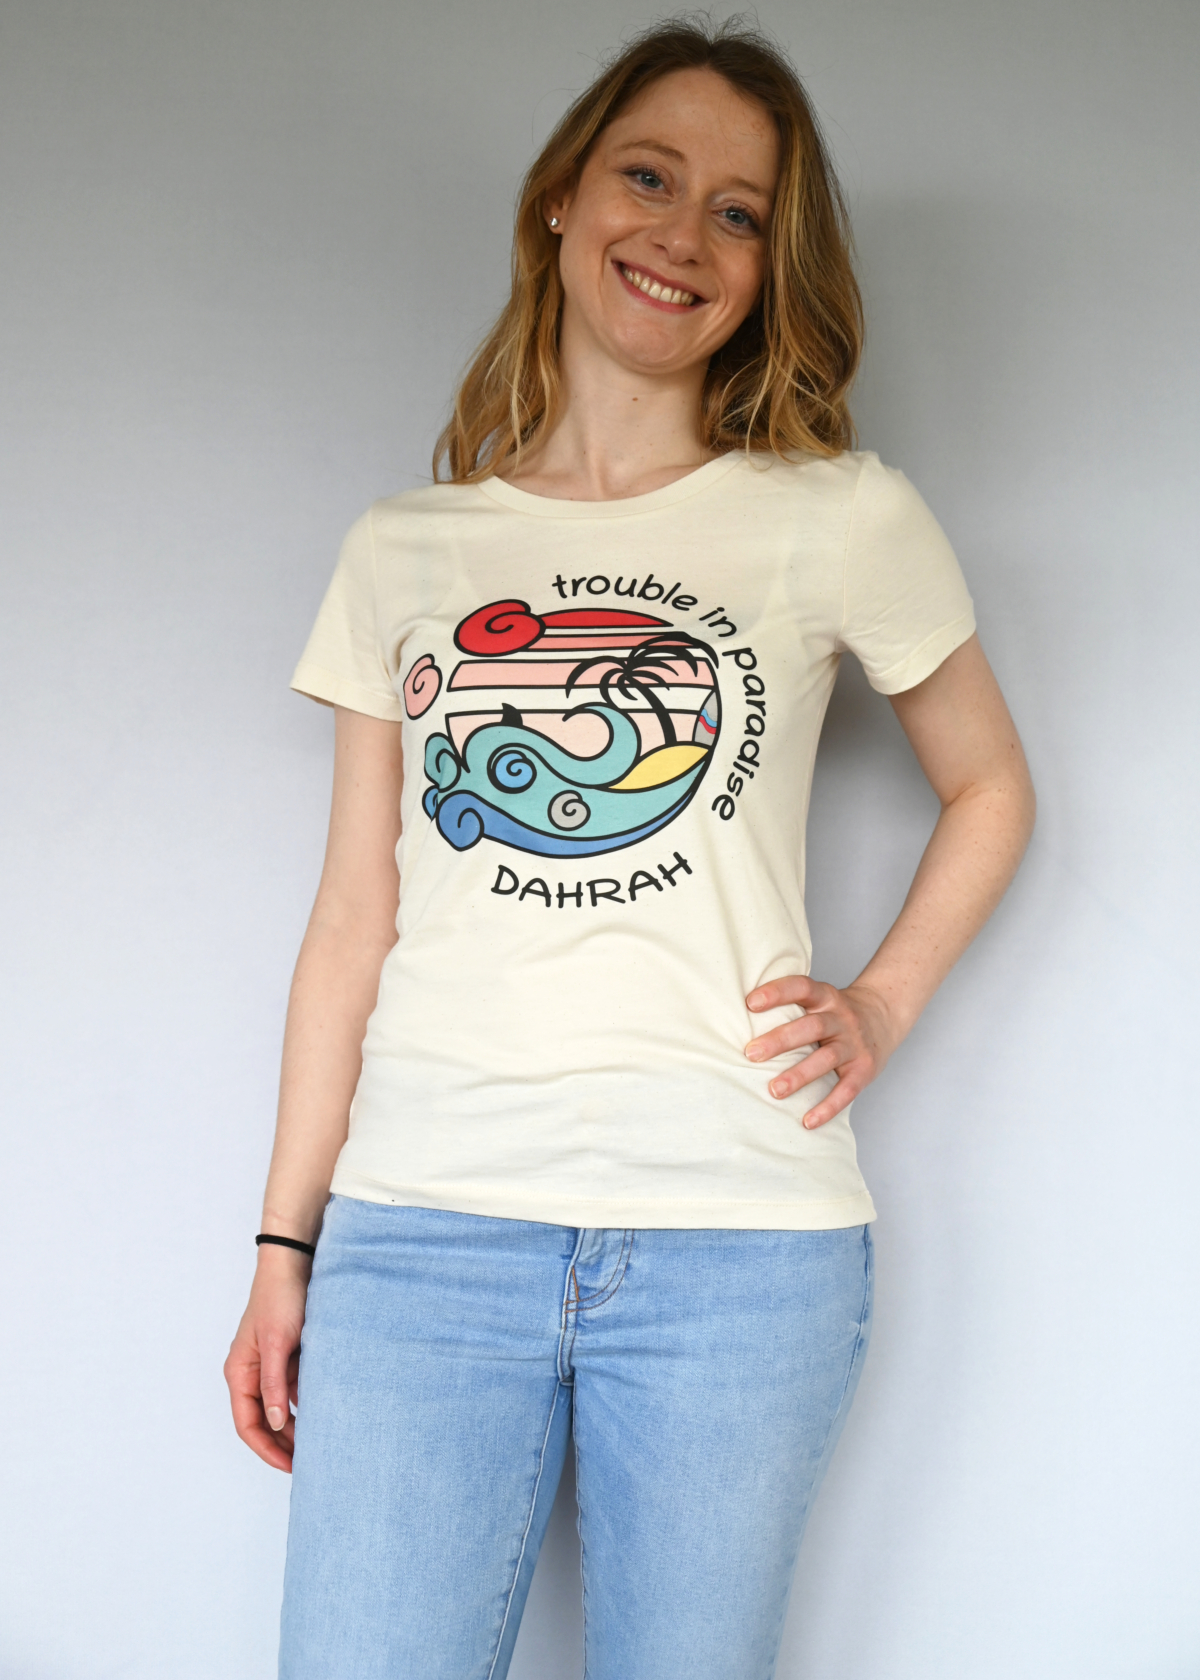 Organic cotton T-shirt with print of a surfing beach with a shark by Dahrah Darah.